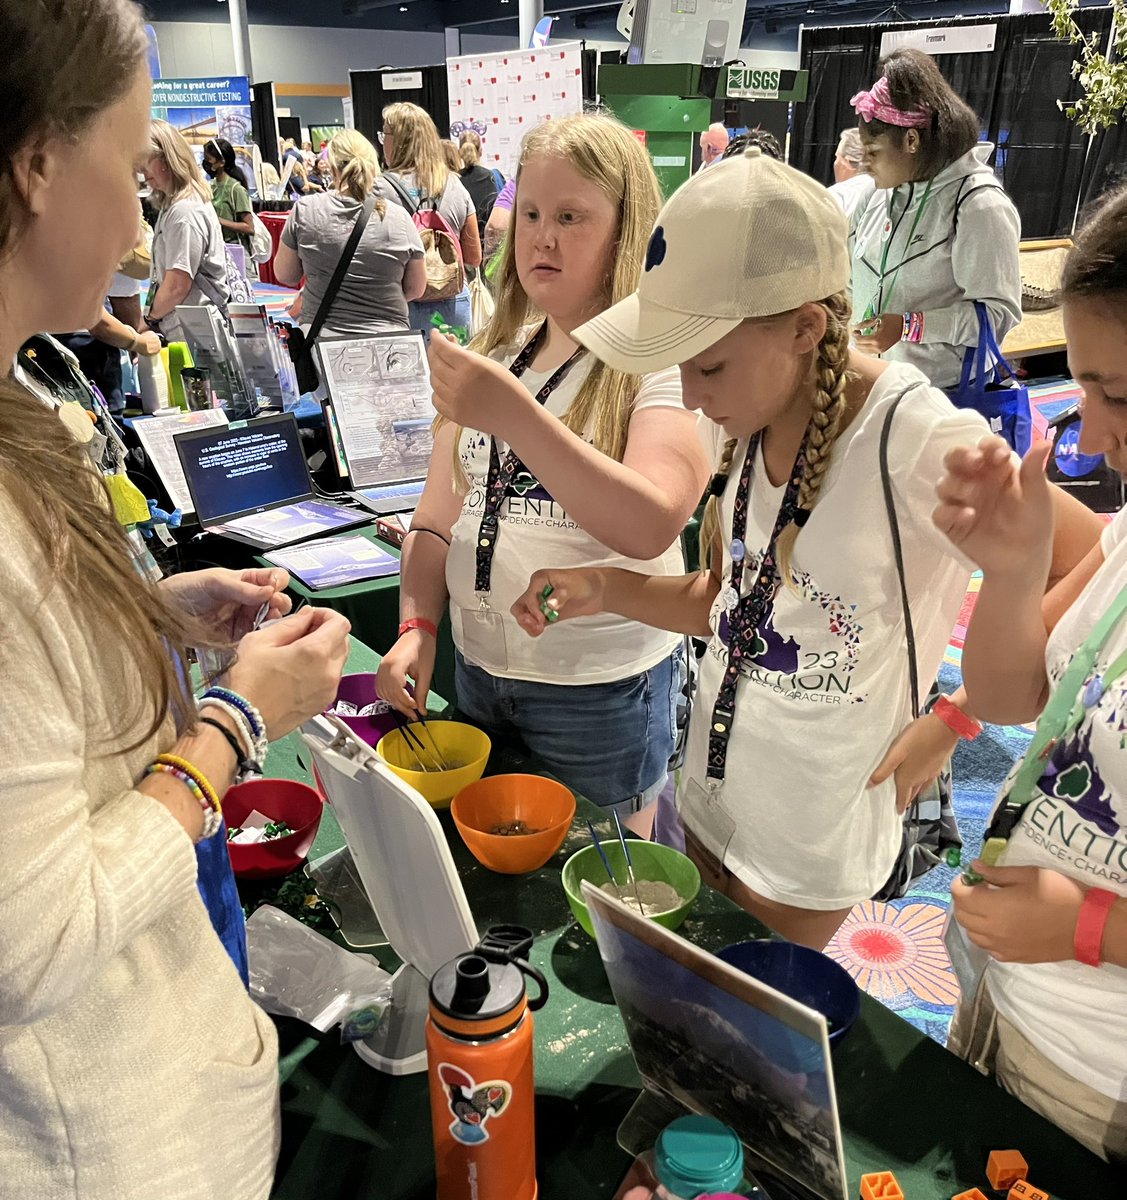 What’s more popular, our #ARSandbox or our Swap station? Hard to say. Both are getting a lot of attention at the #PhenomByGirlScouts. Come by for your vial of Mt St Helens ash, or build a landscape @USGS